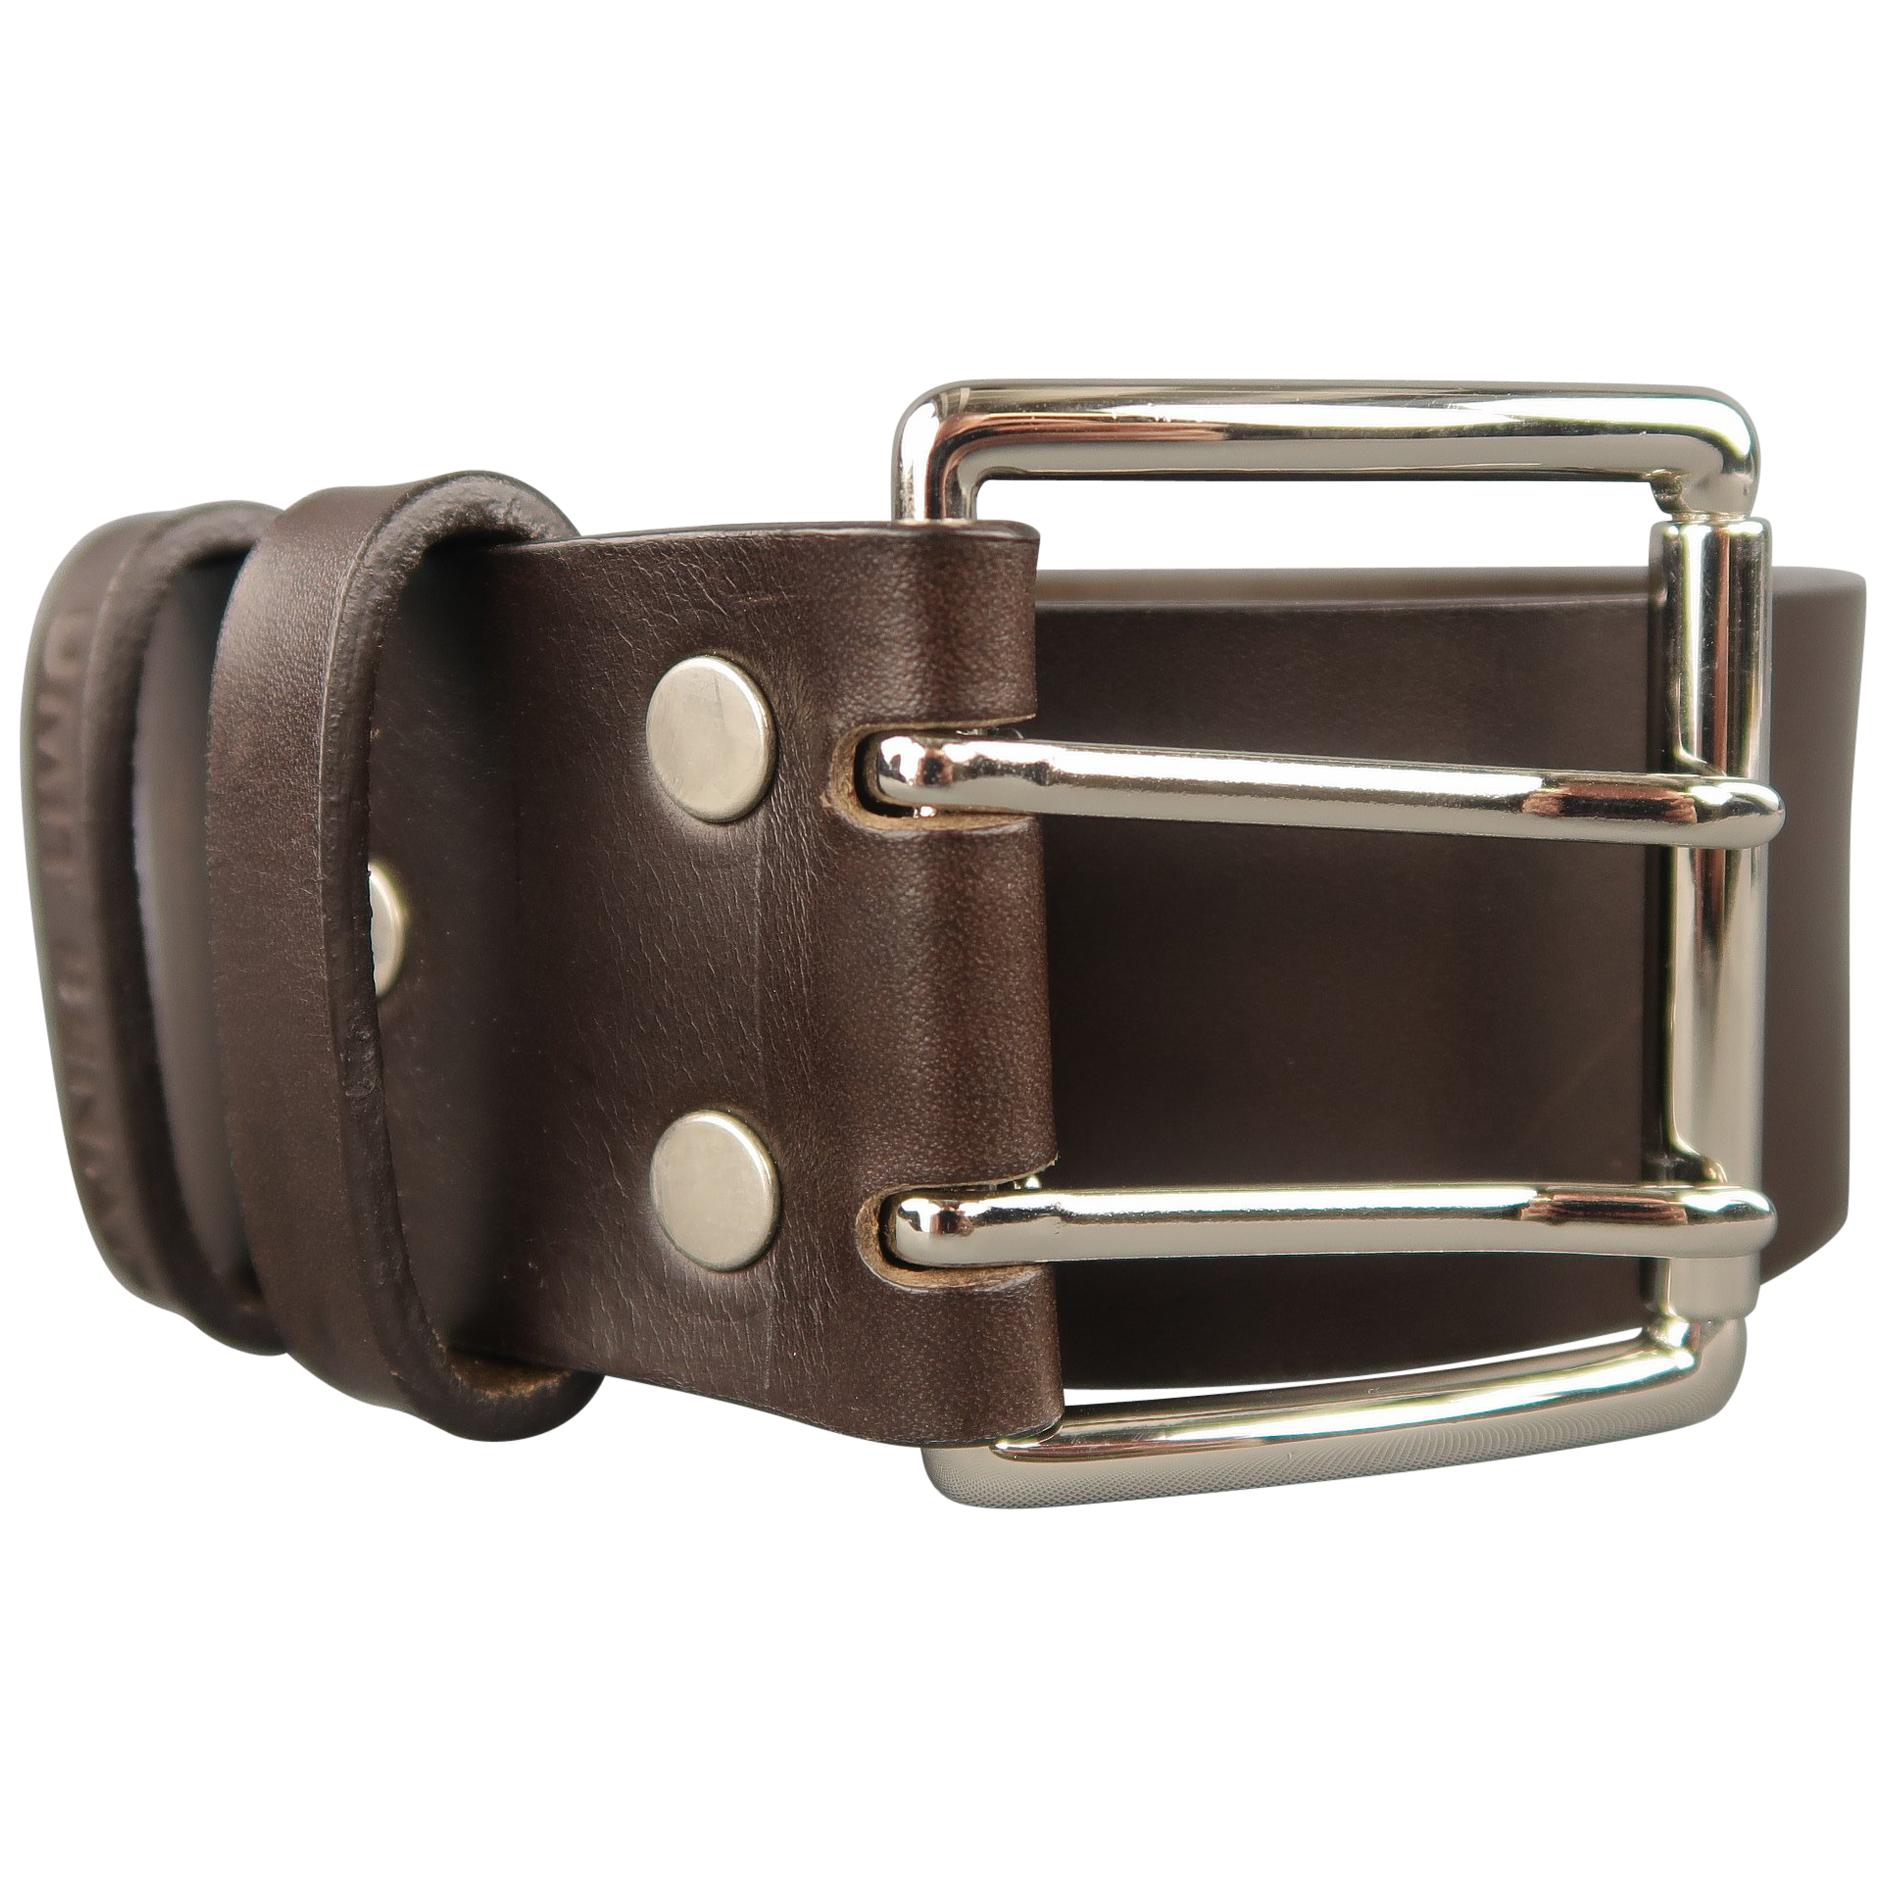 UMIT BENAN Belt - Size 34 Dark Brown Leather Silver Double Prong Buckle